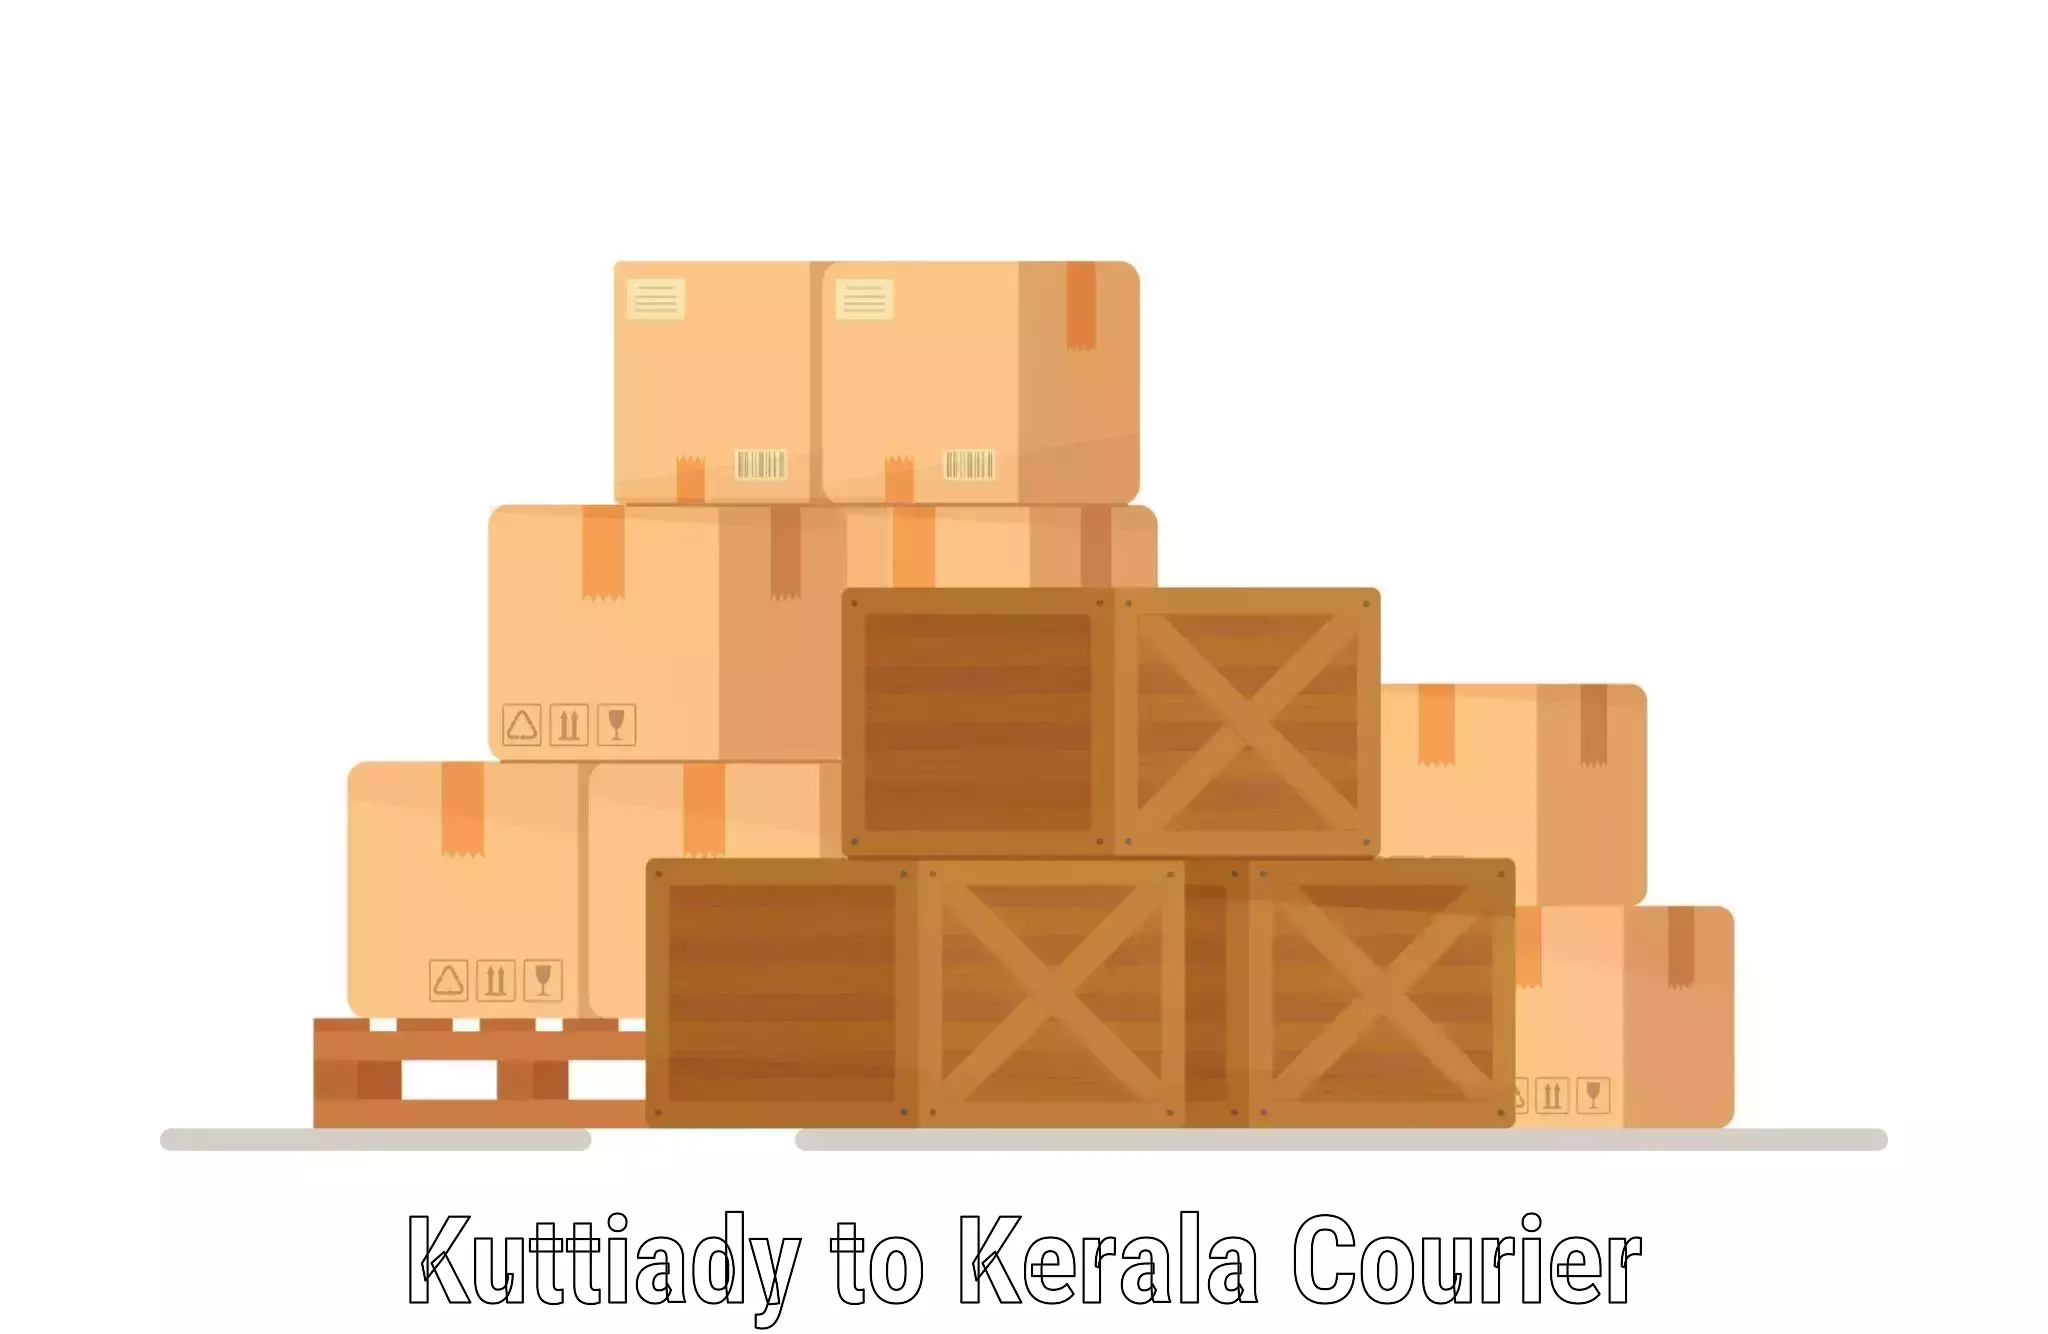 Door-to-door freight service Kuttiady to Cochin University of Science and Technology